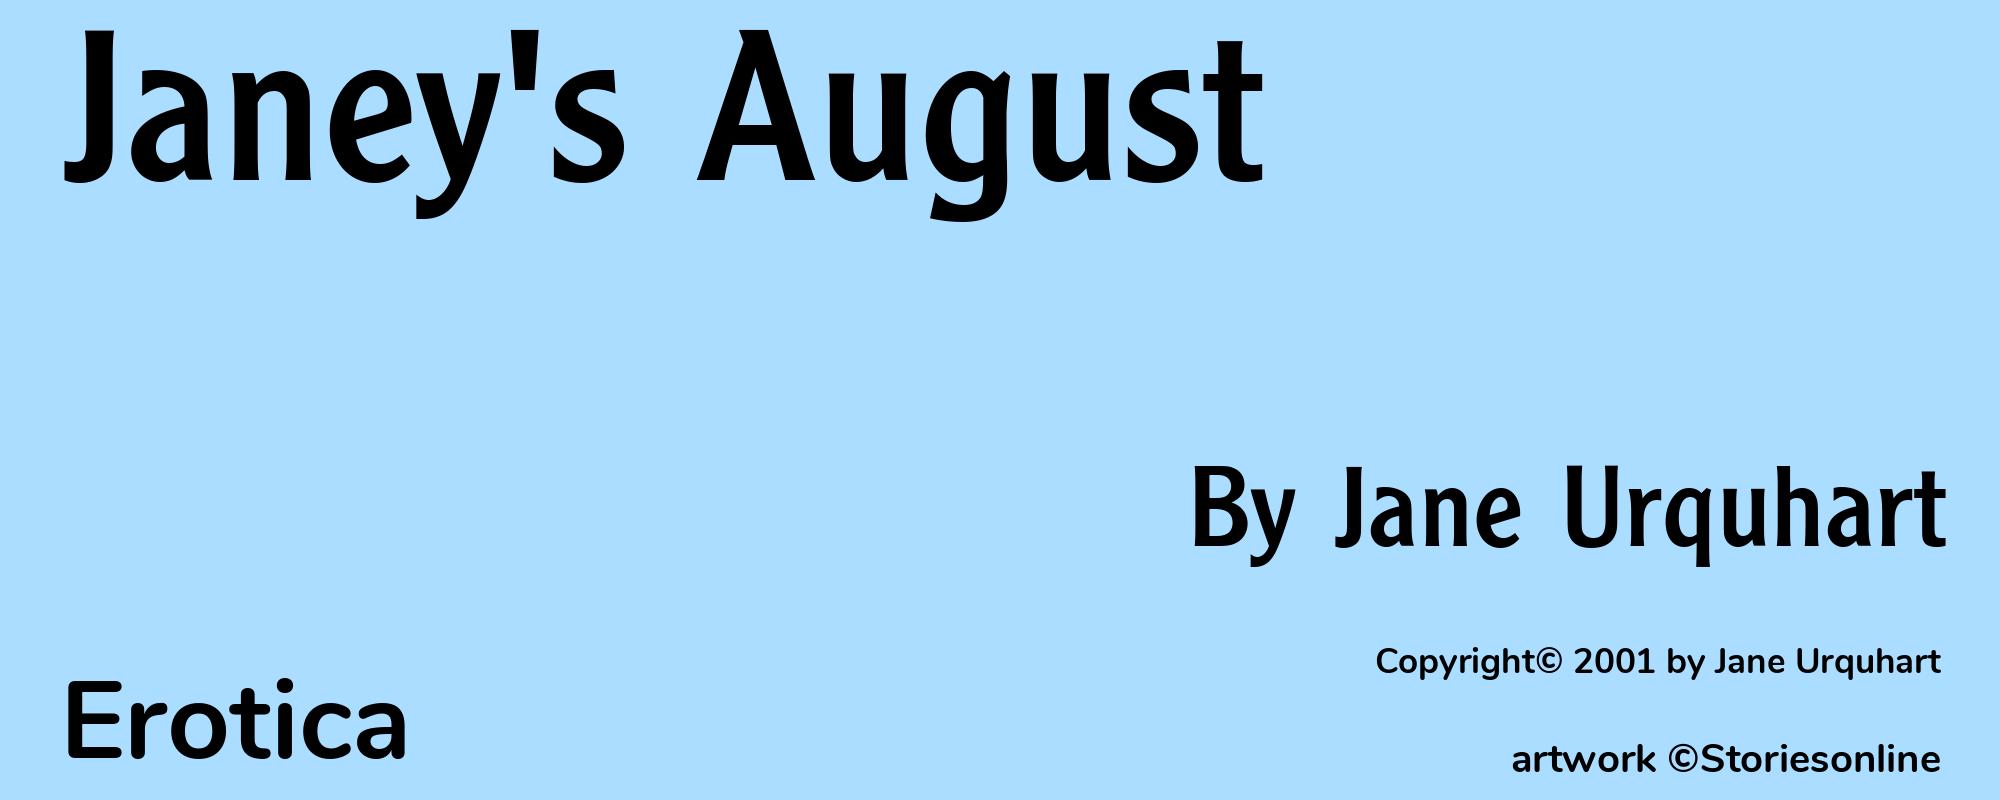 Janey's August - Cover